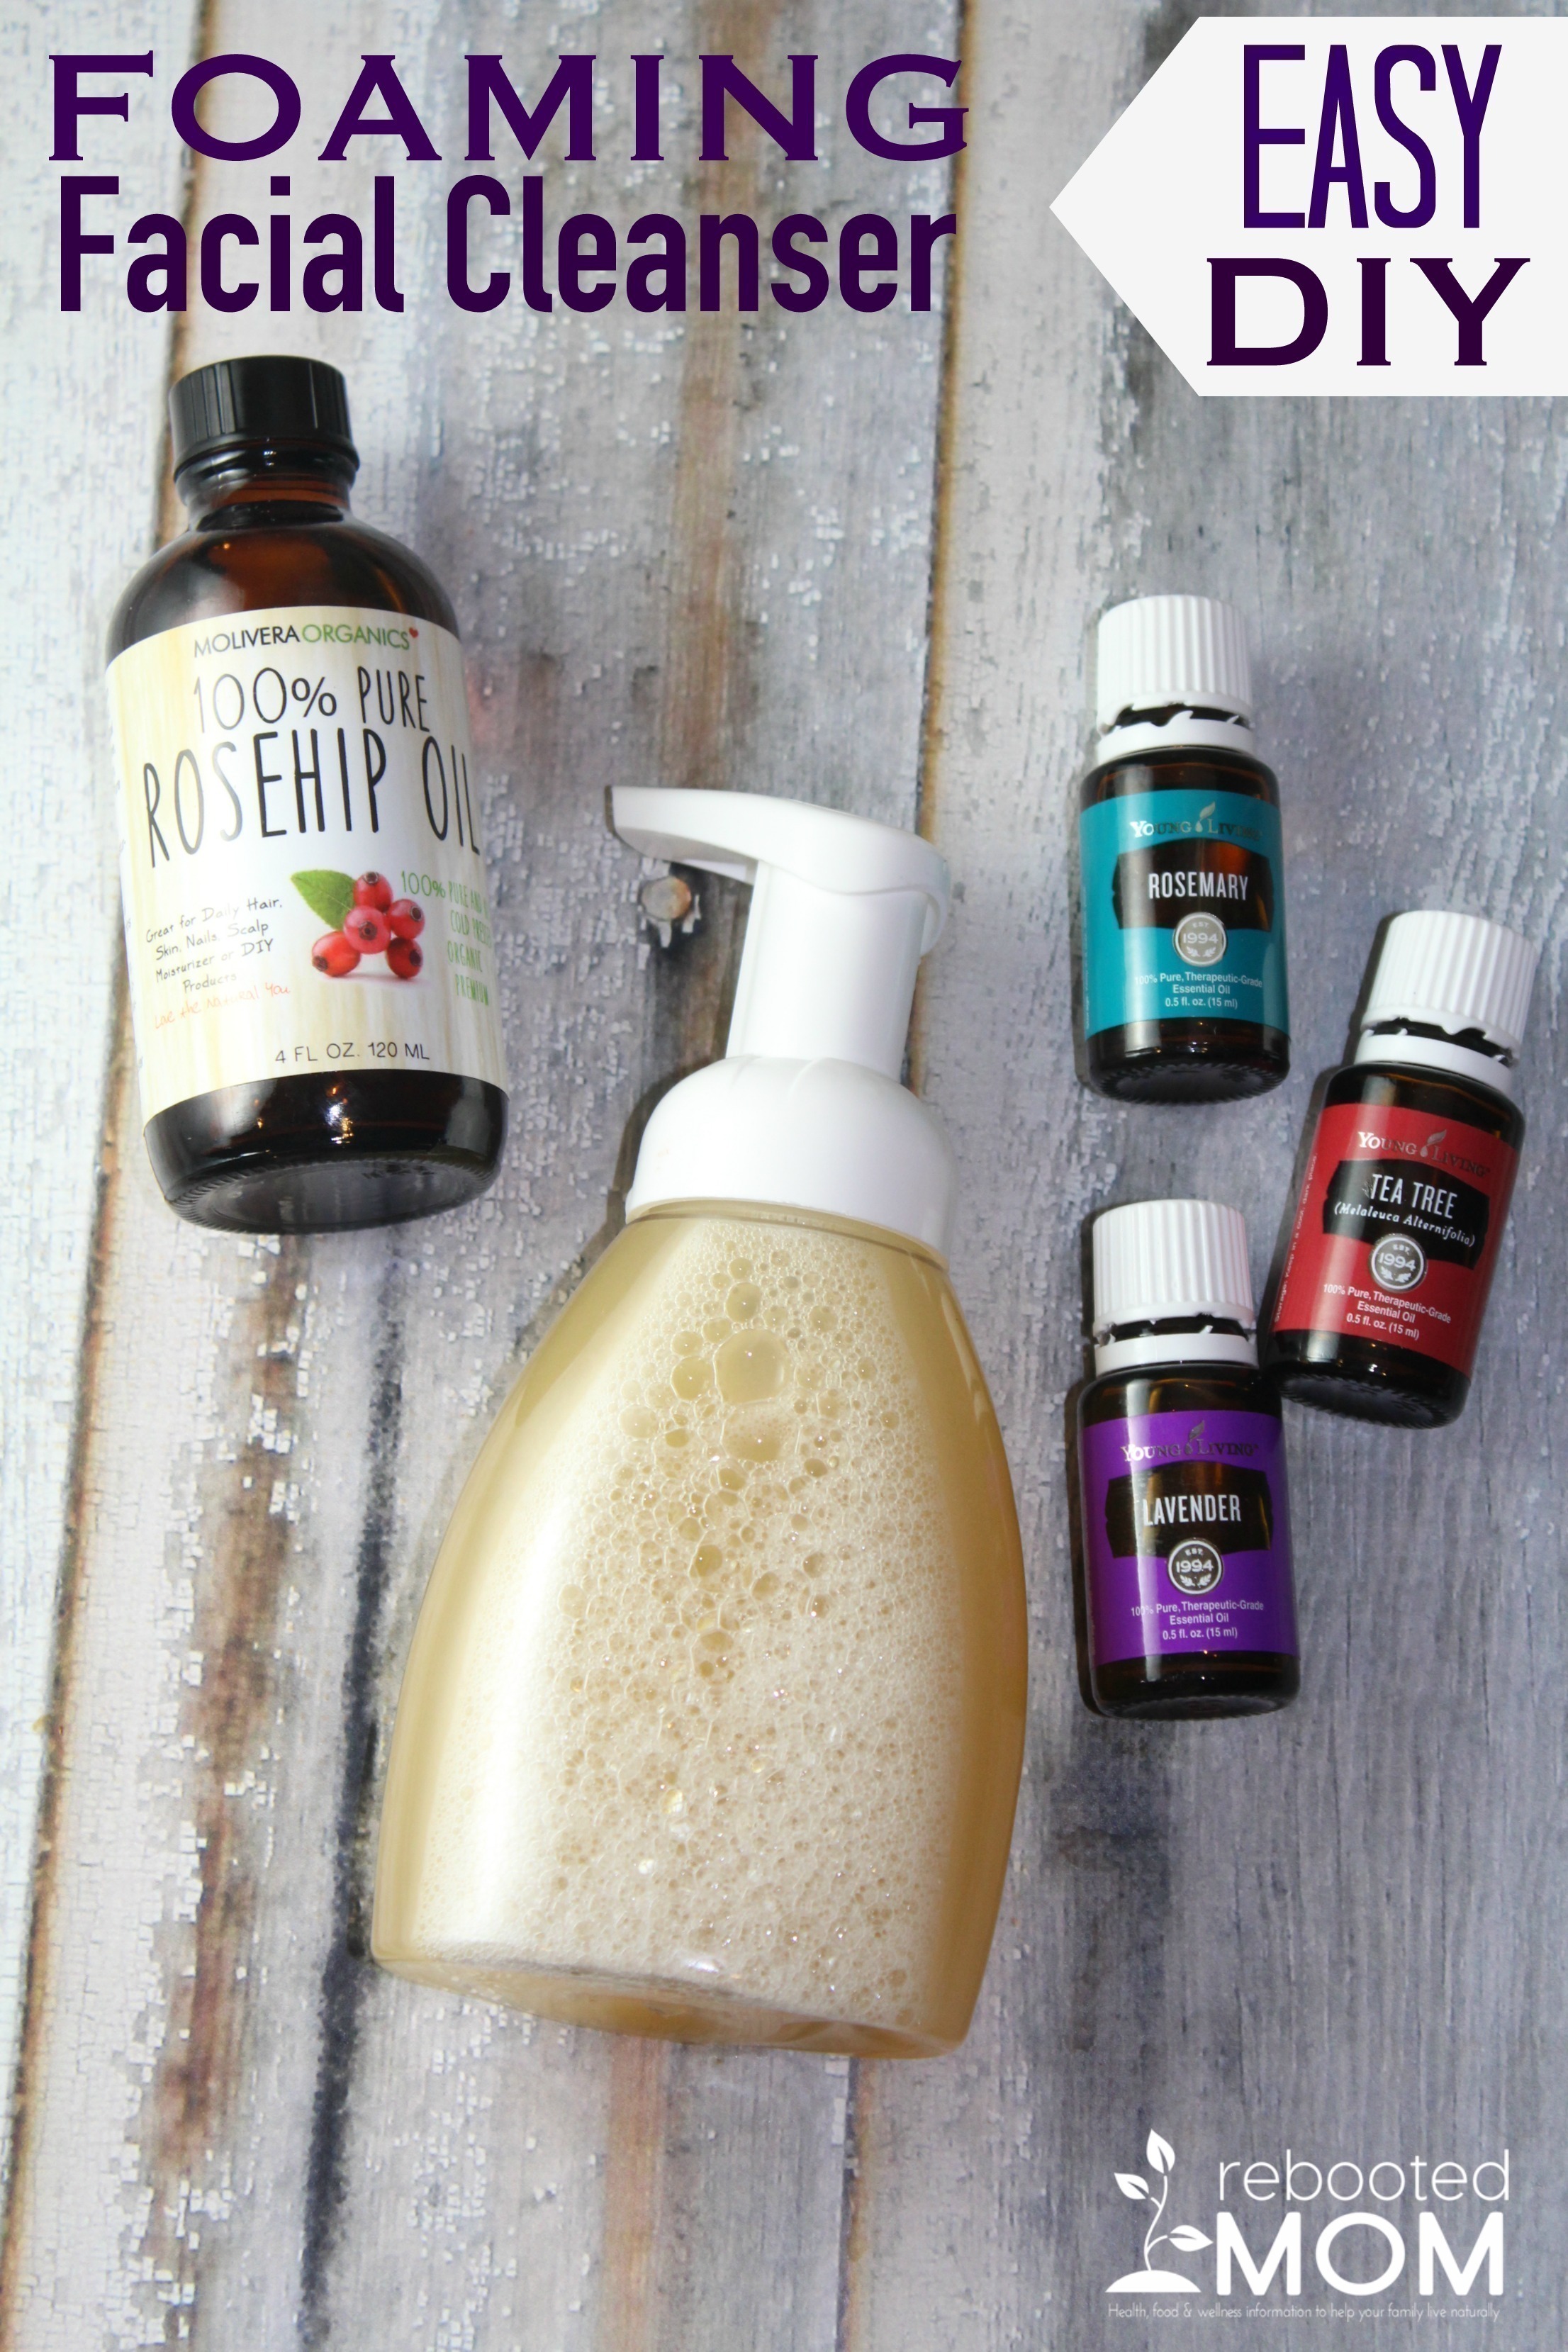 Homemade Foaming Facial Cleanser